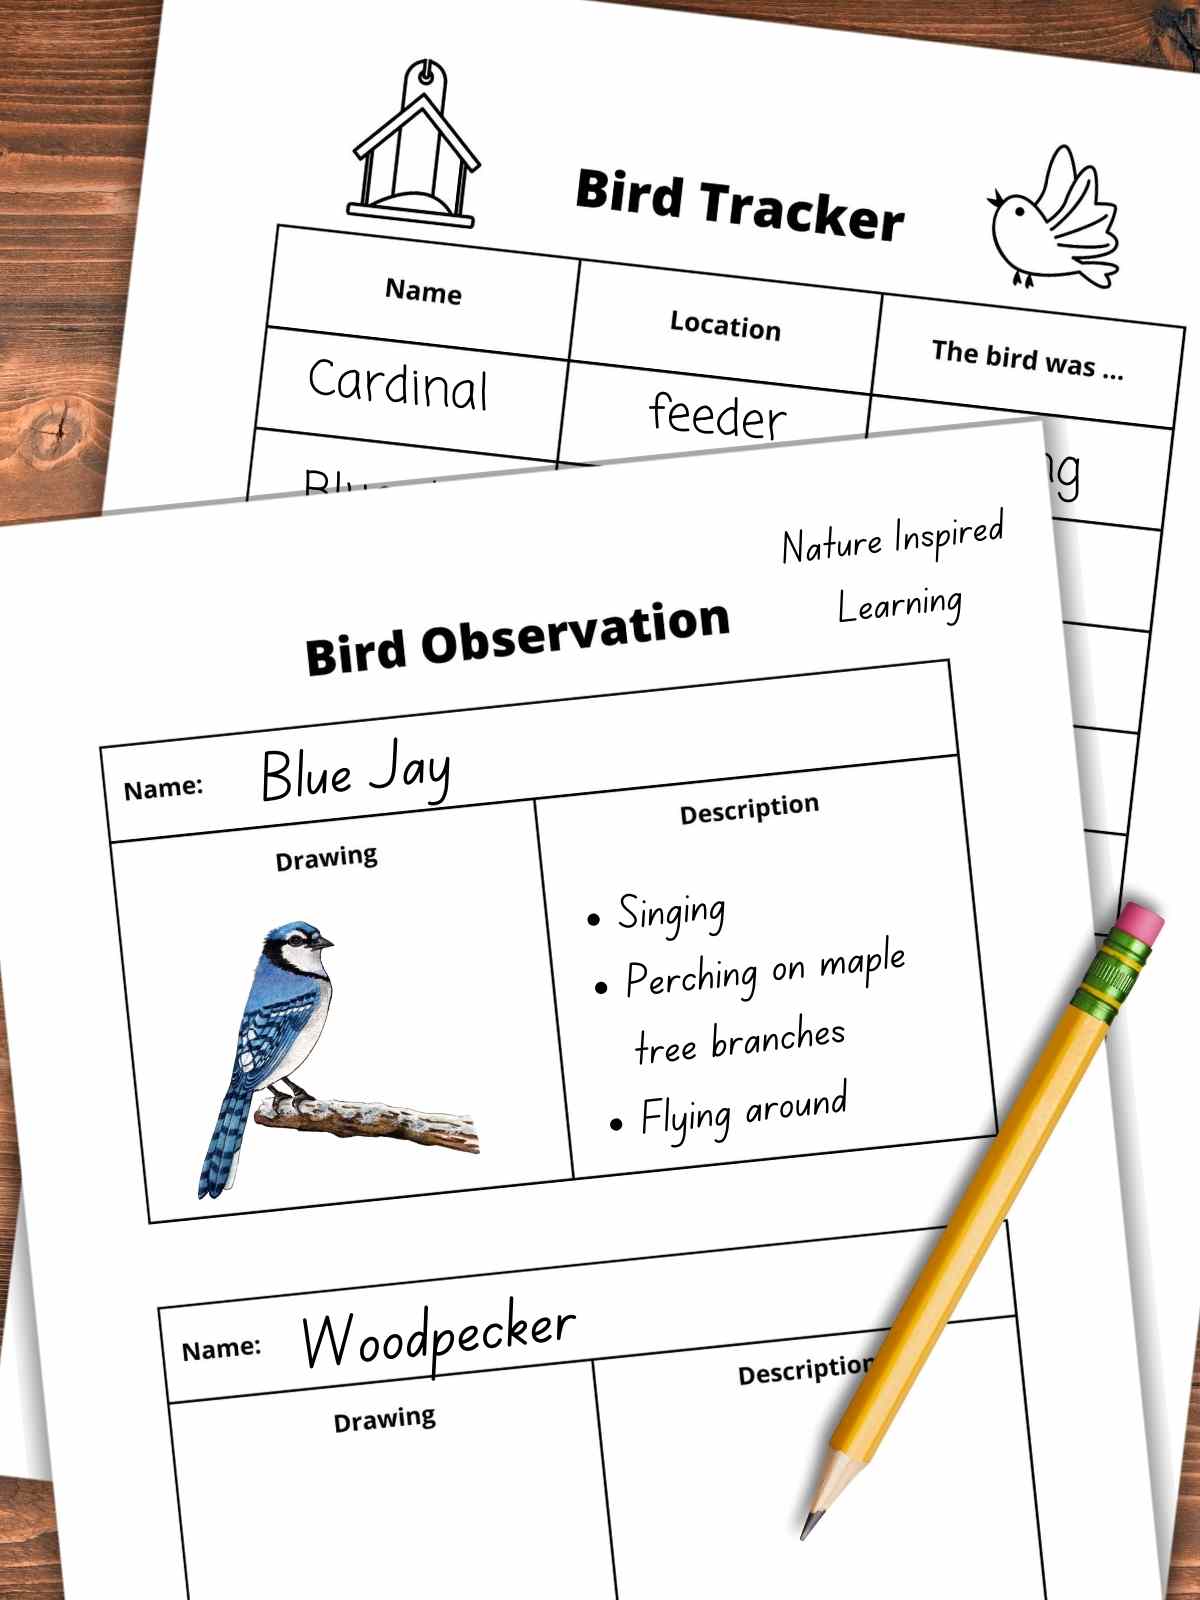 Bird tracking worksheet below a bird observation worksheet with a blue jay drawing and description. Pencil on the bottom right on top of the printables. Wooden background below.